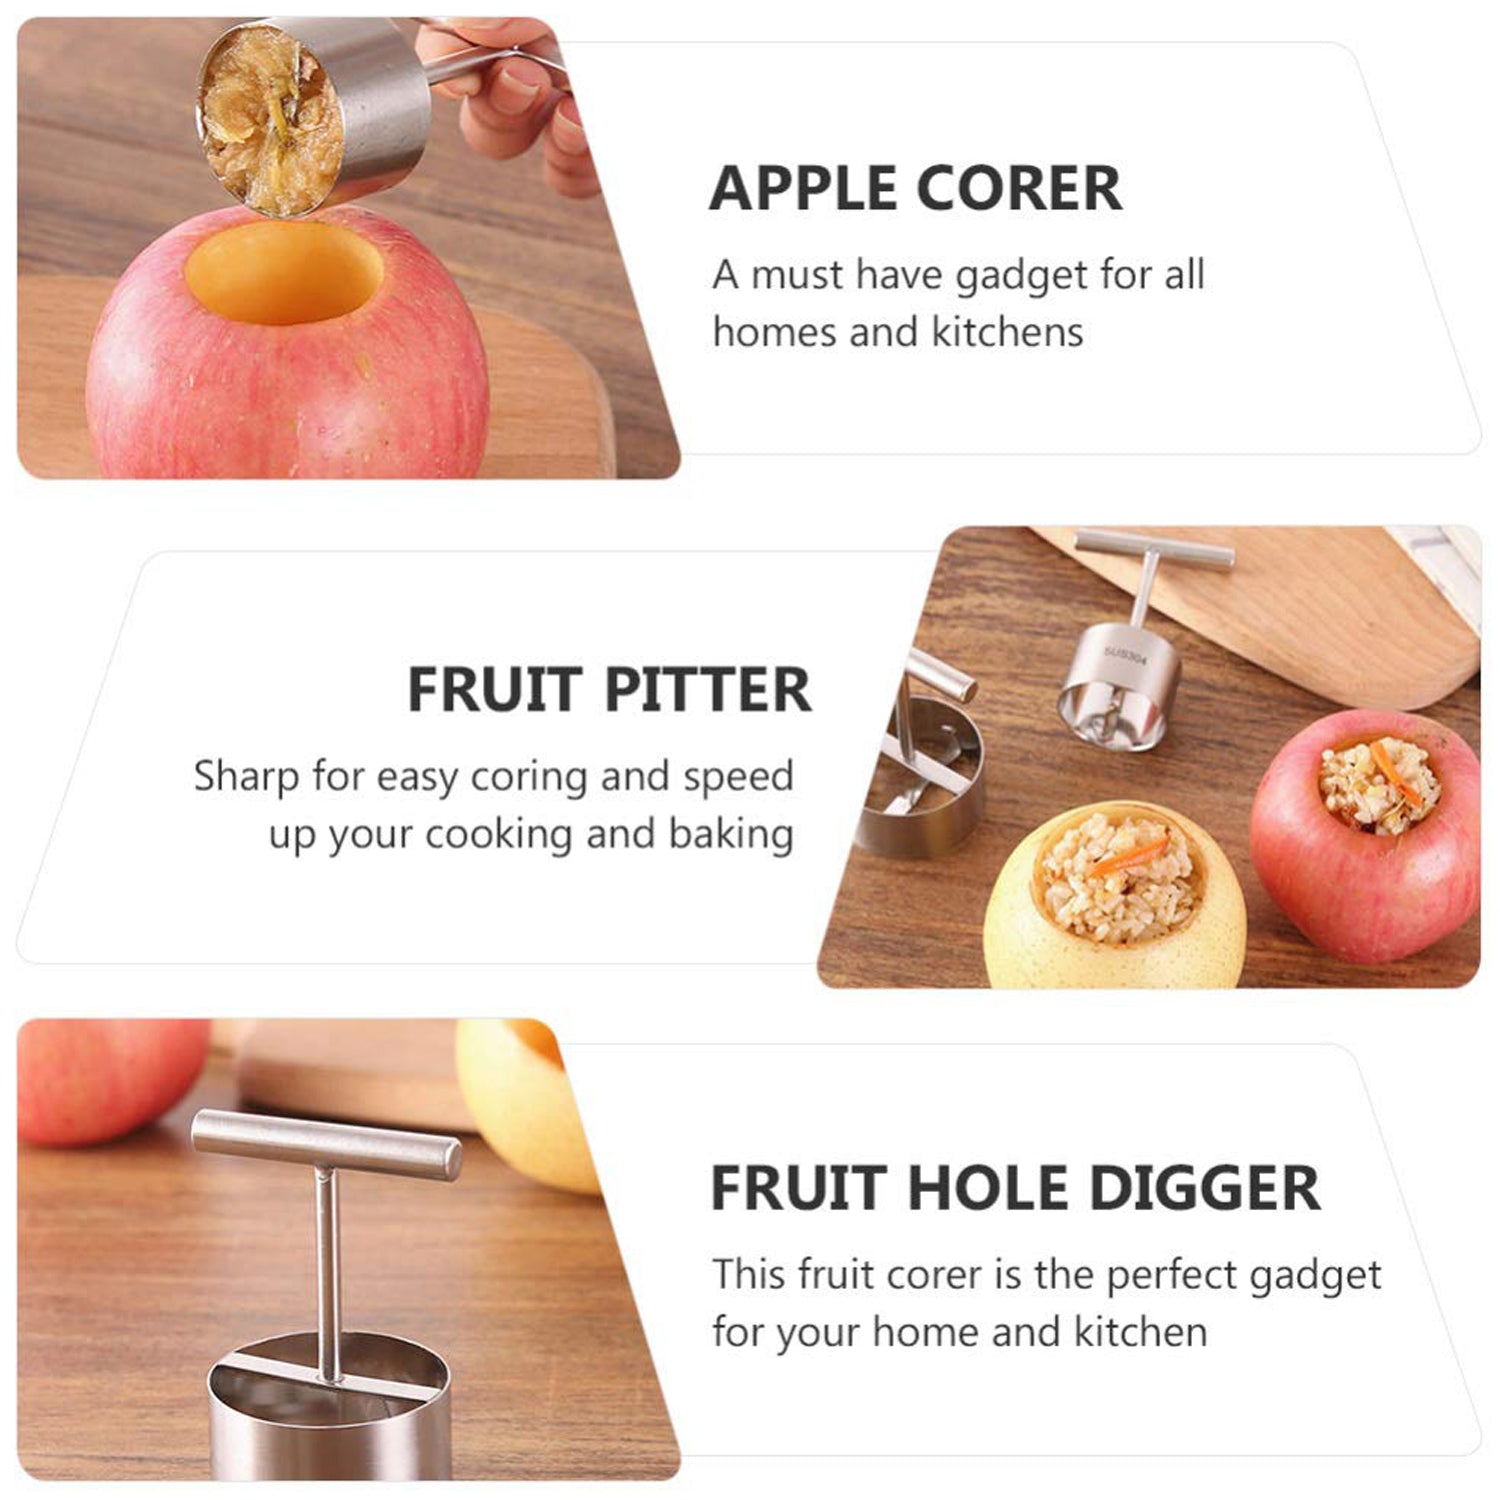 10016 Corer Pear Core Separator Vegetable Core Remover Seeder Cutter Pitter Fruit Hole Remover Coring Tool (1 Pc)